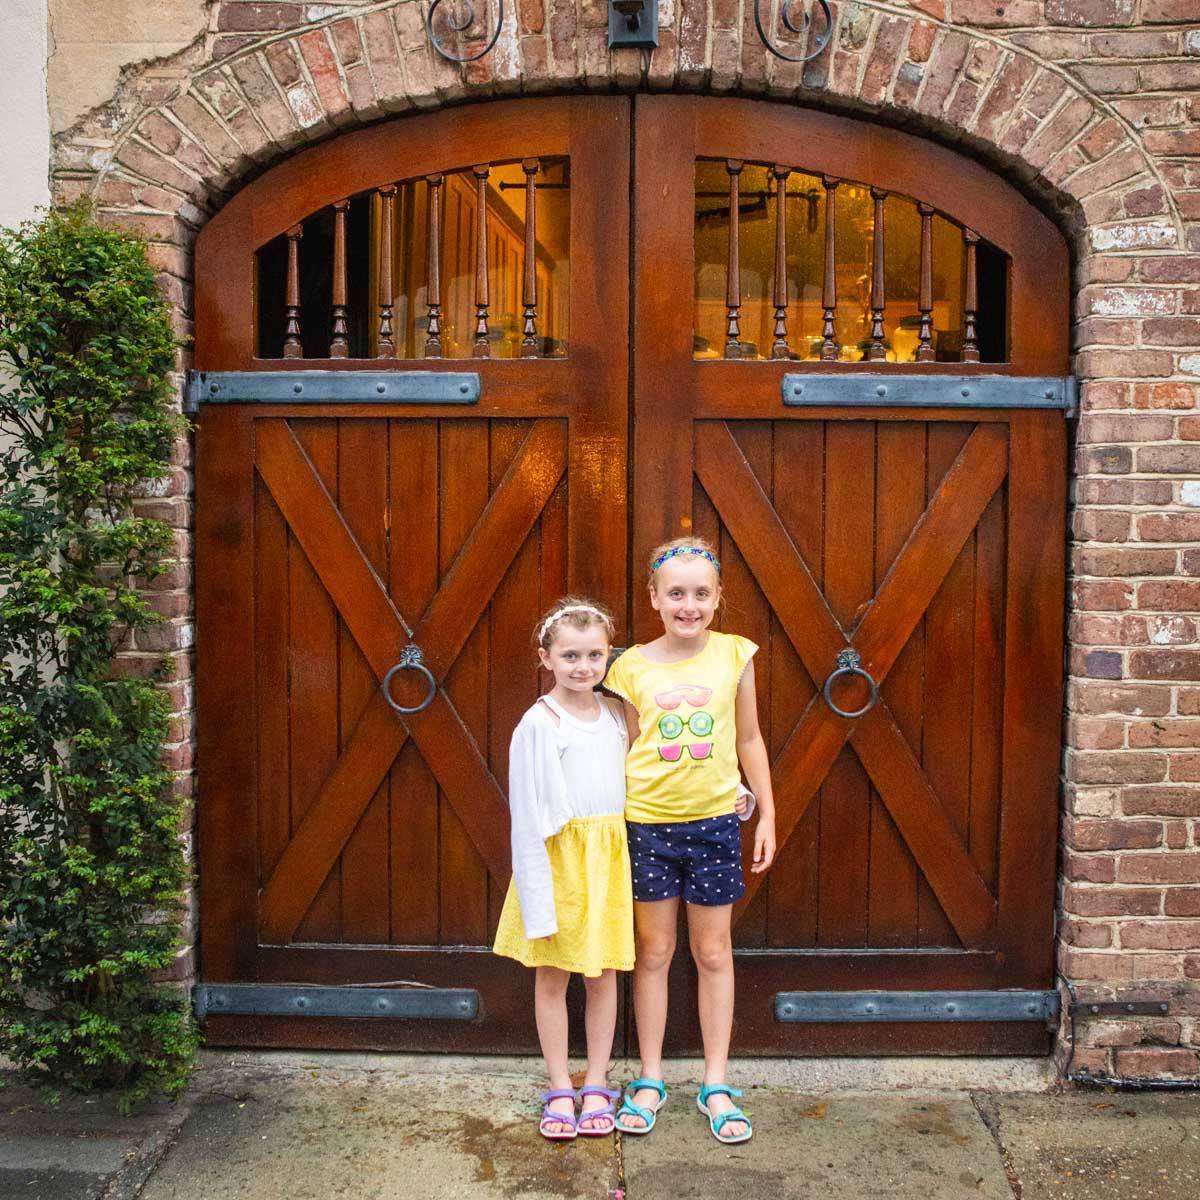 Two young girls stand in front of a decorative gate on vacation.